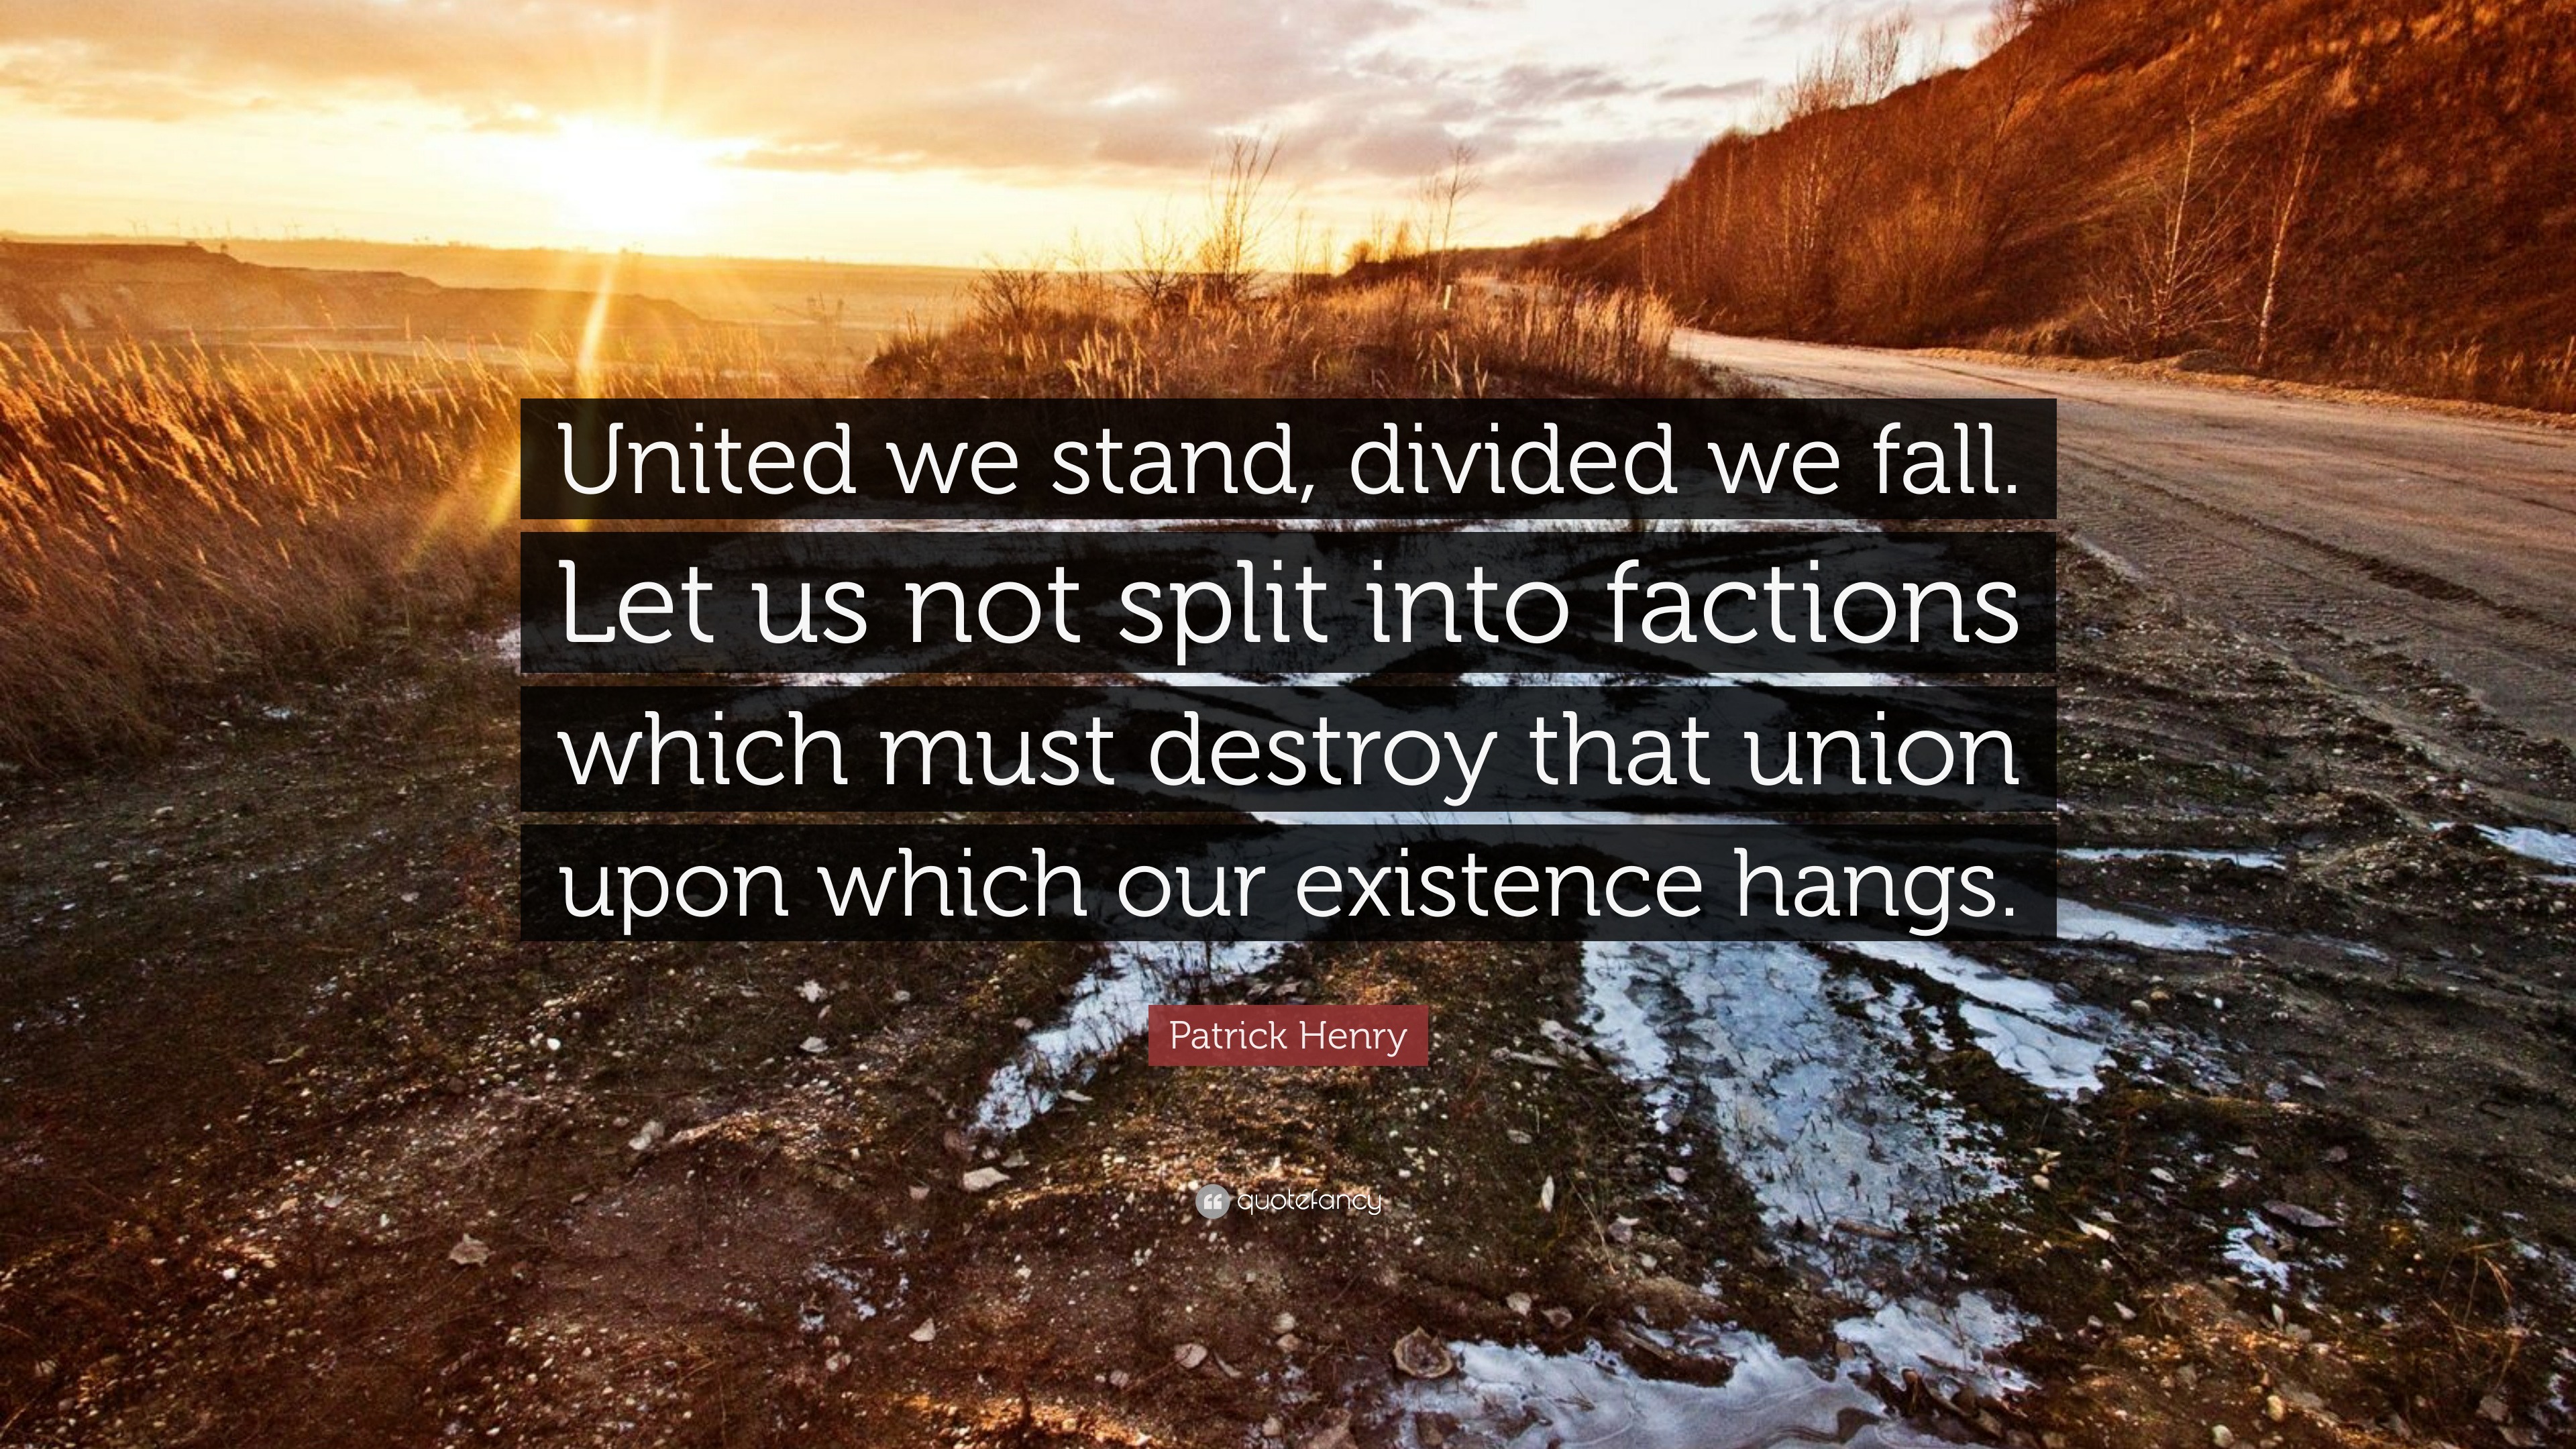 Patrick Henry Quote: “United we stand, divided we fall. Let us not